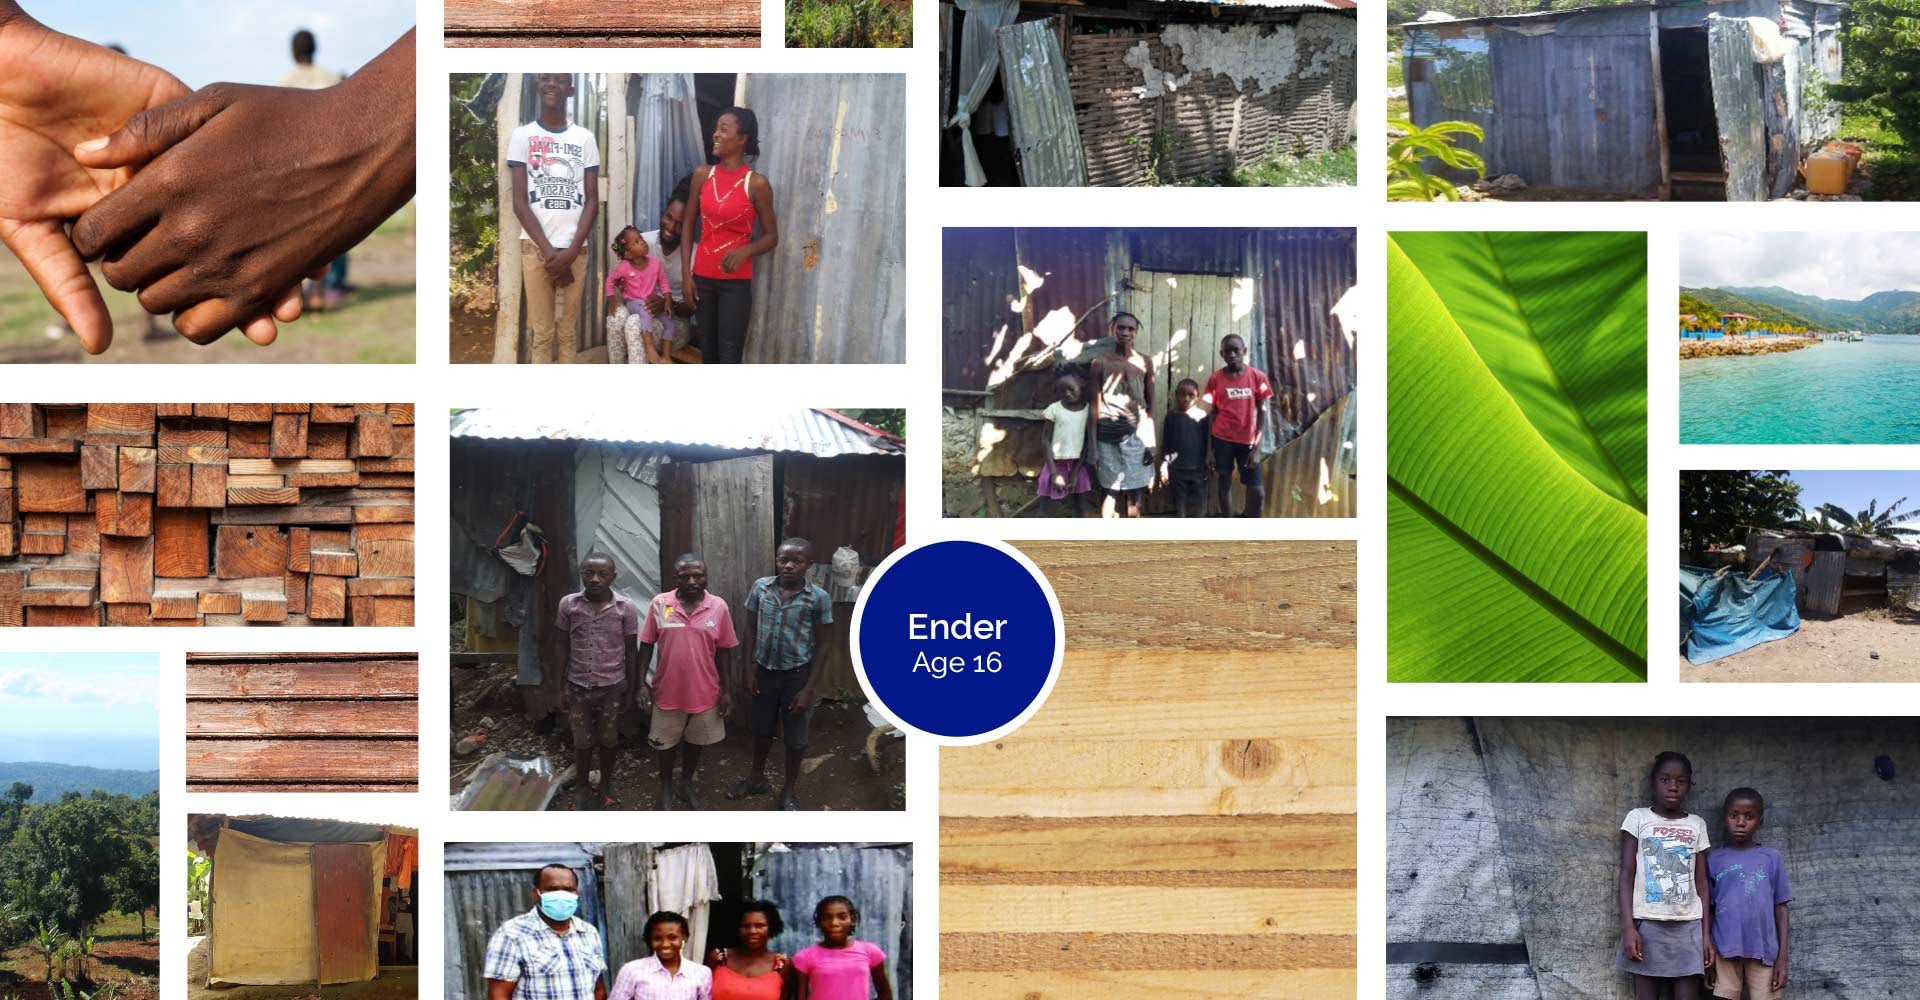 A photo collage of Ender's home and family in Haiti